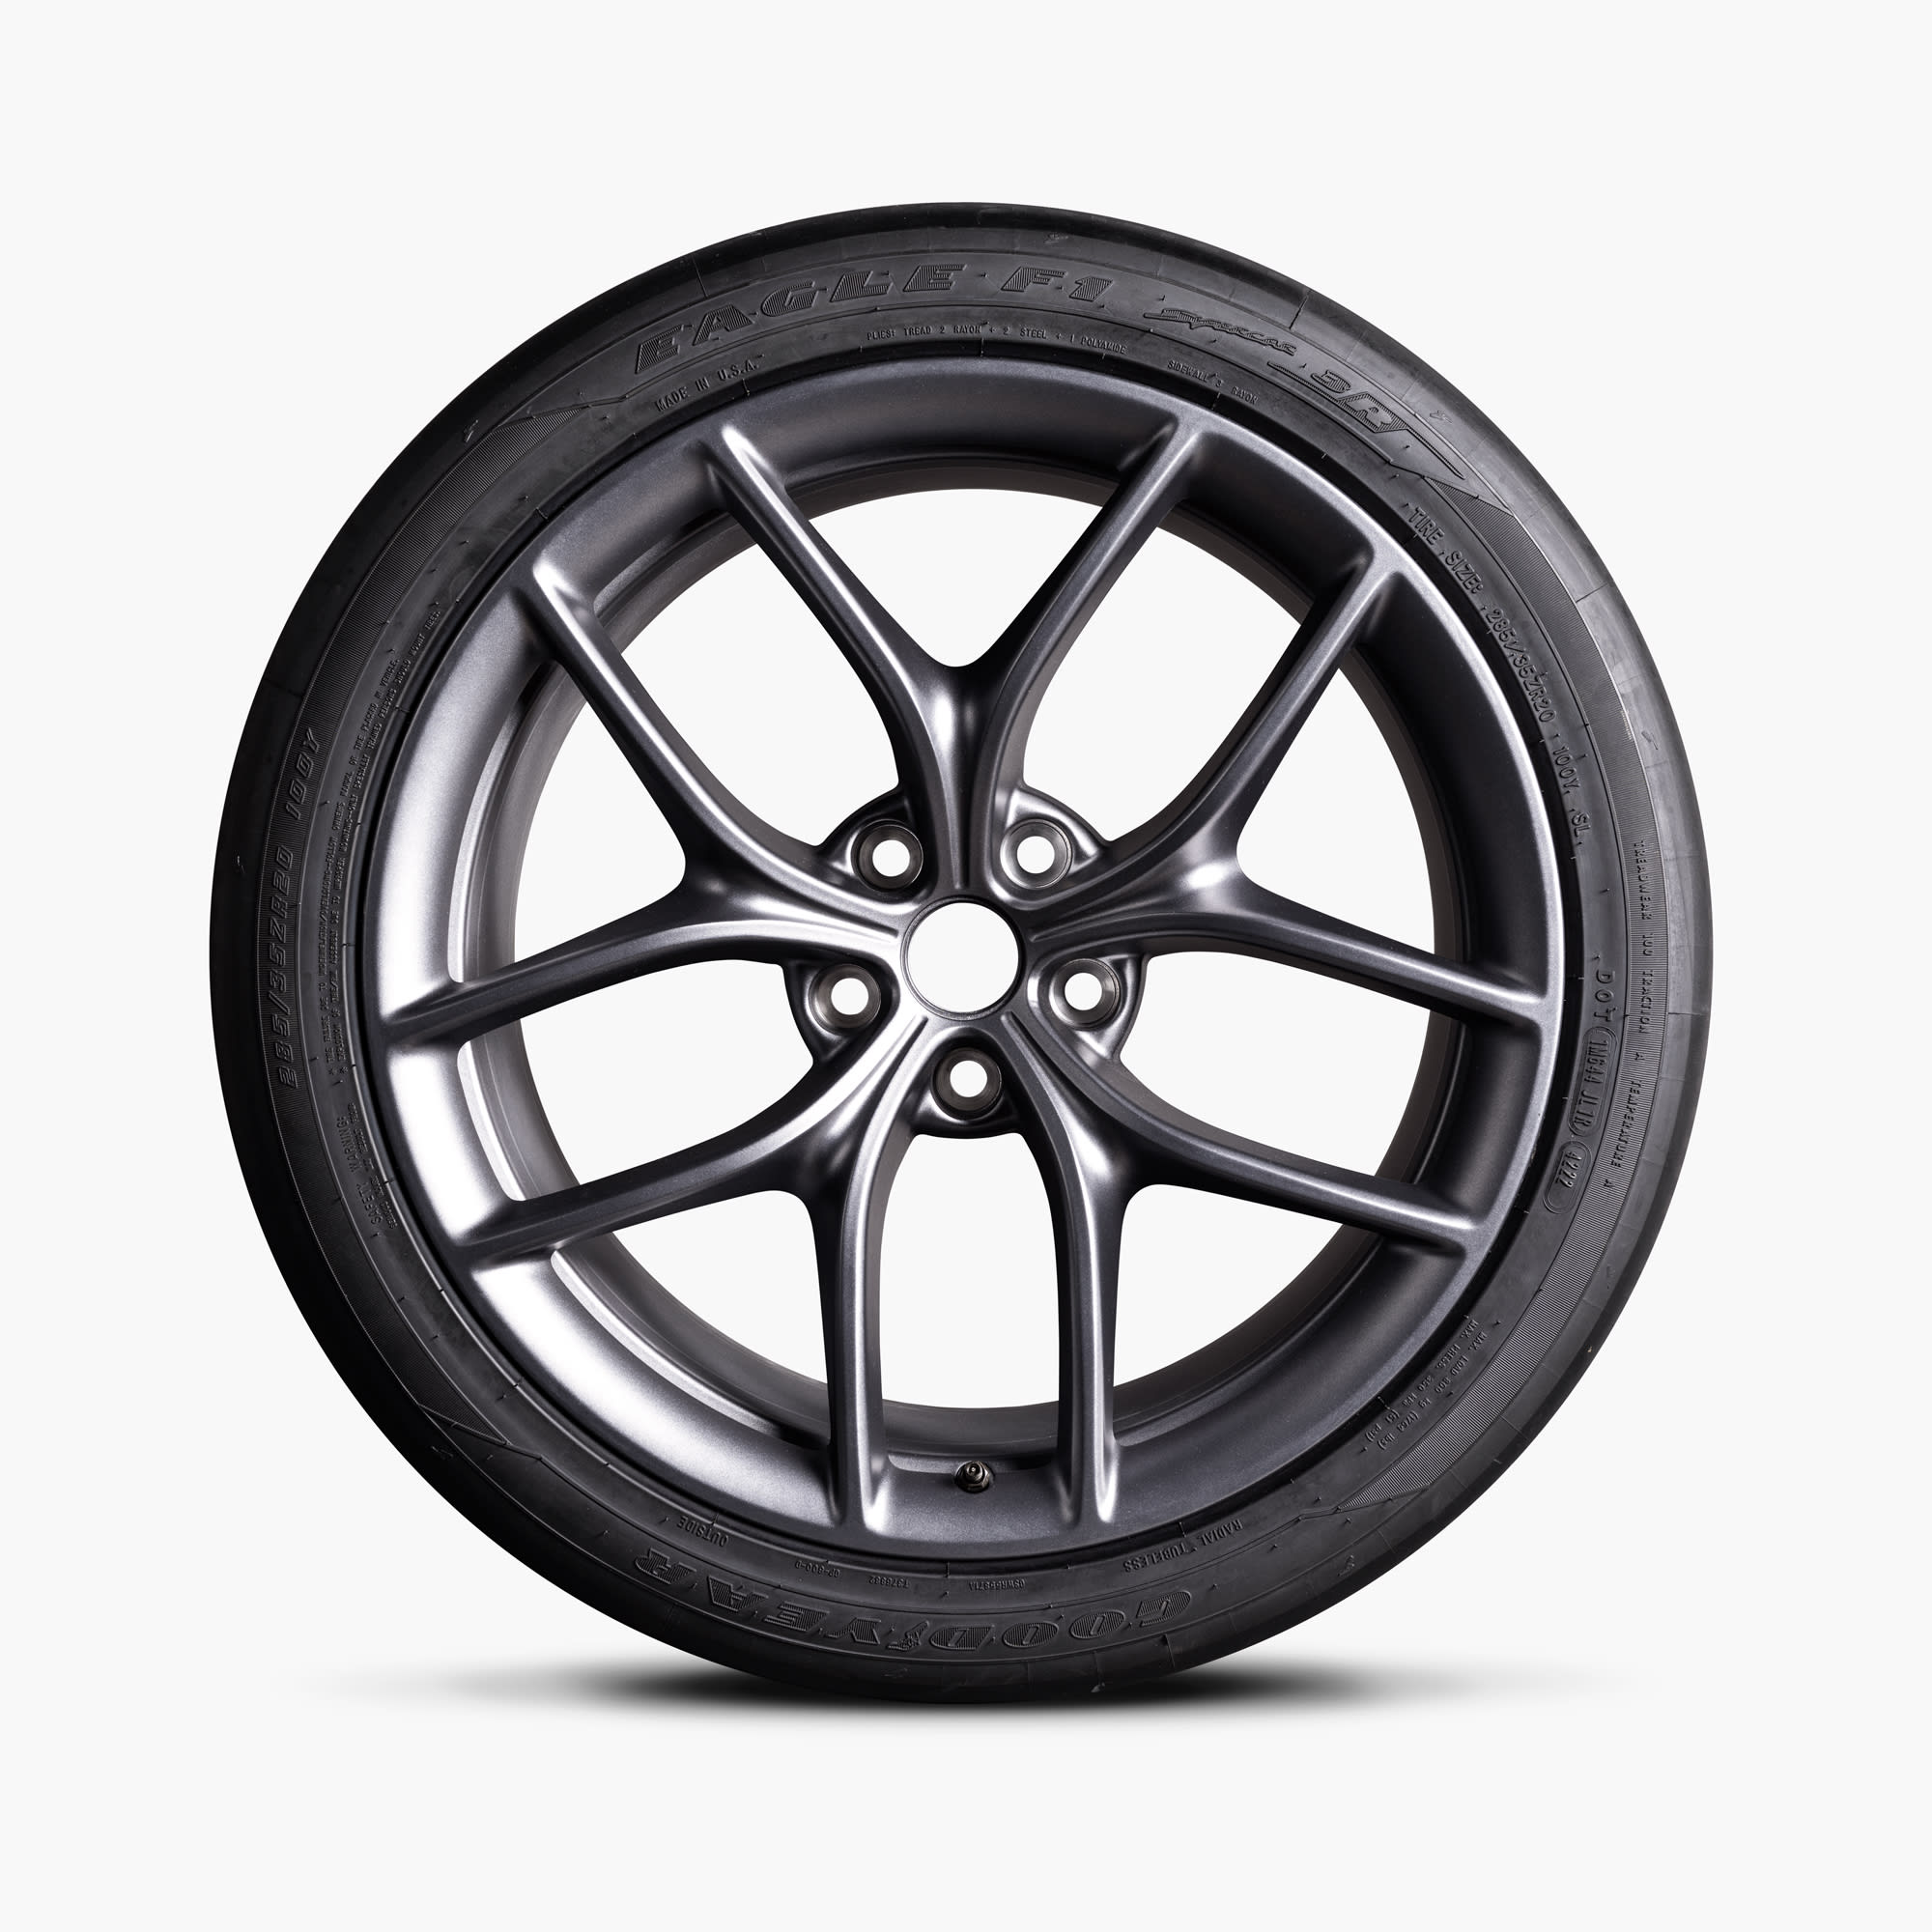 Model S Plaid 20" Zero-G Wheel and Tire Package